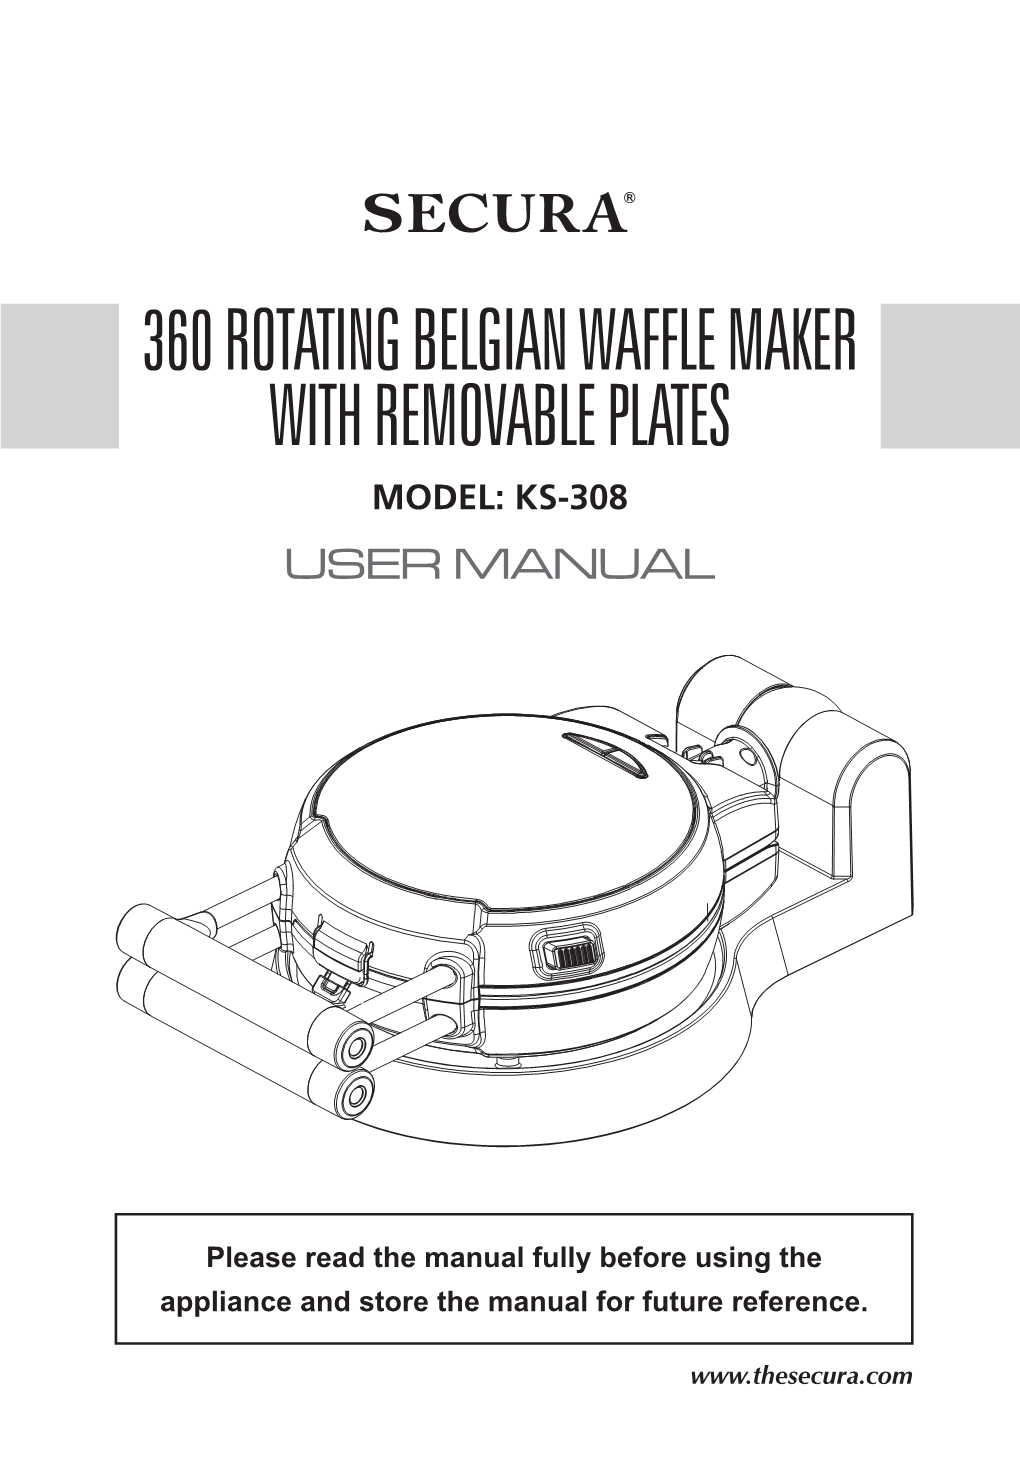 360 Rotating Belgian Waffle Maker with Removable Plates Model: Ks-308 User Manual